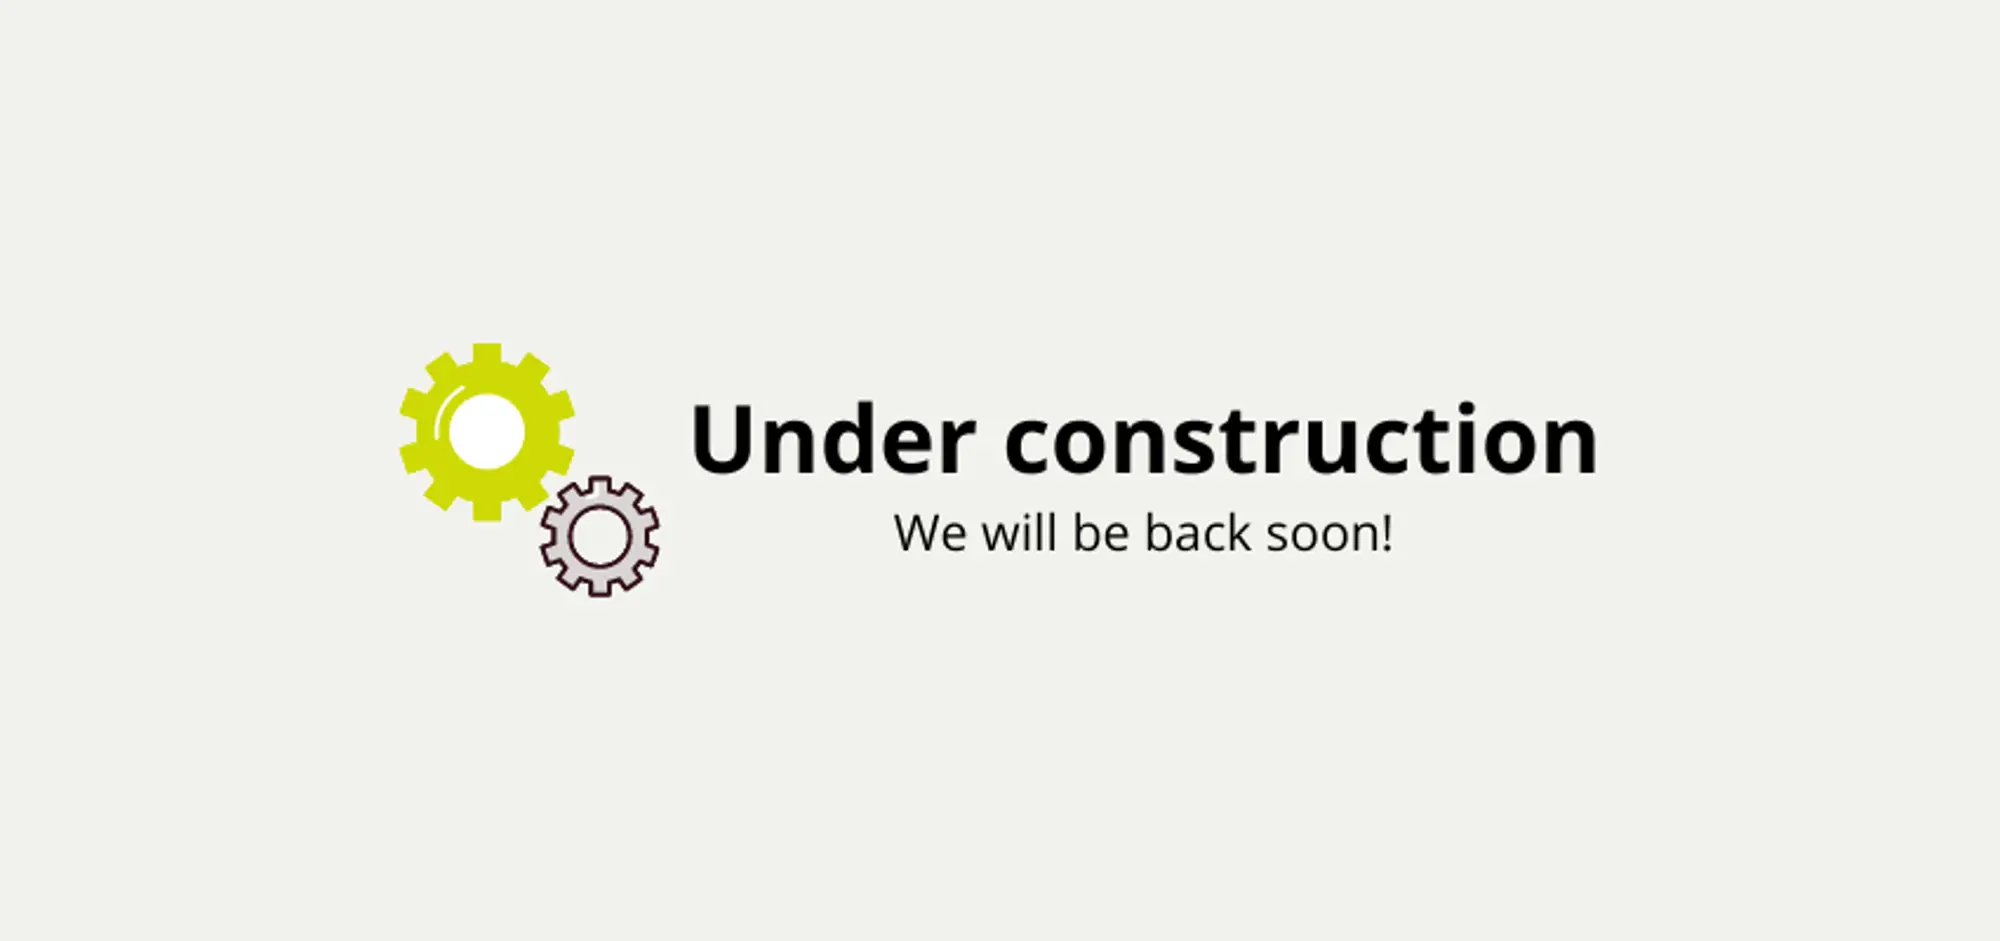 The Sisow portal is temporarily under construction